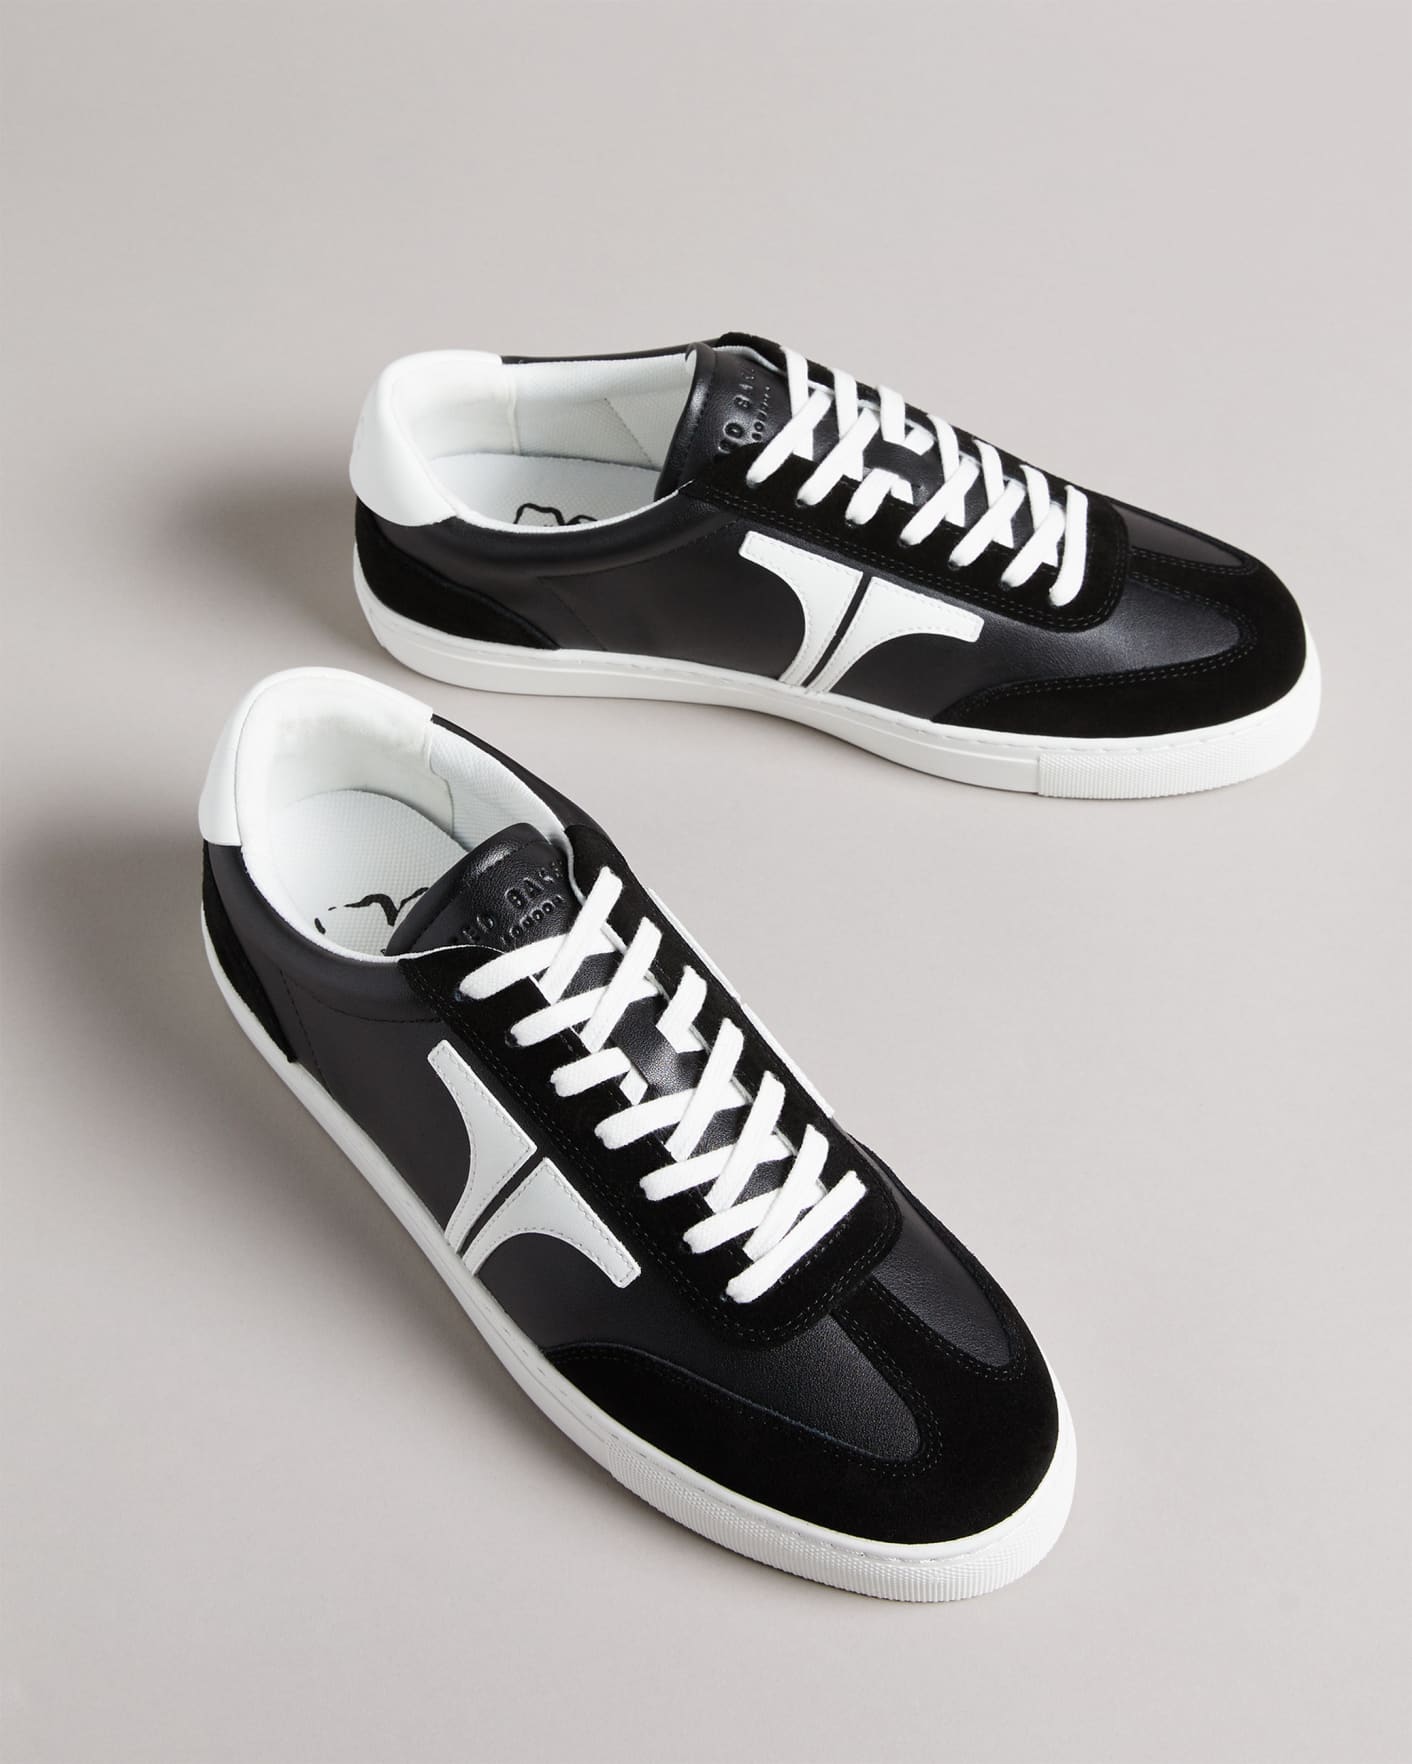 Black Retro Suede Leather Mix Sneaker Ted Baker